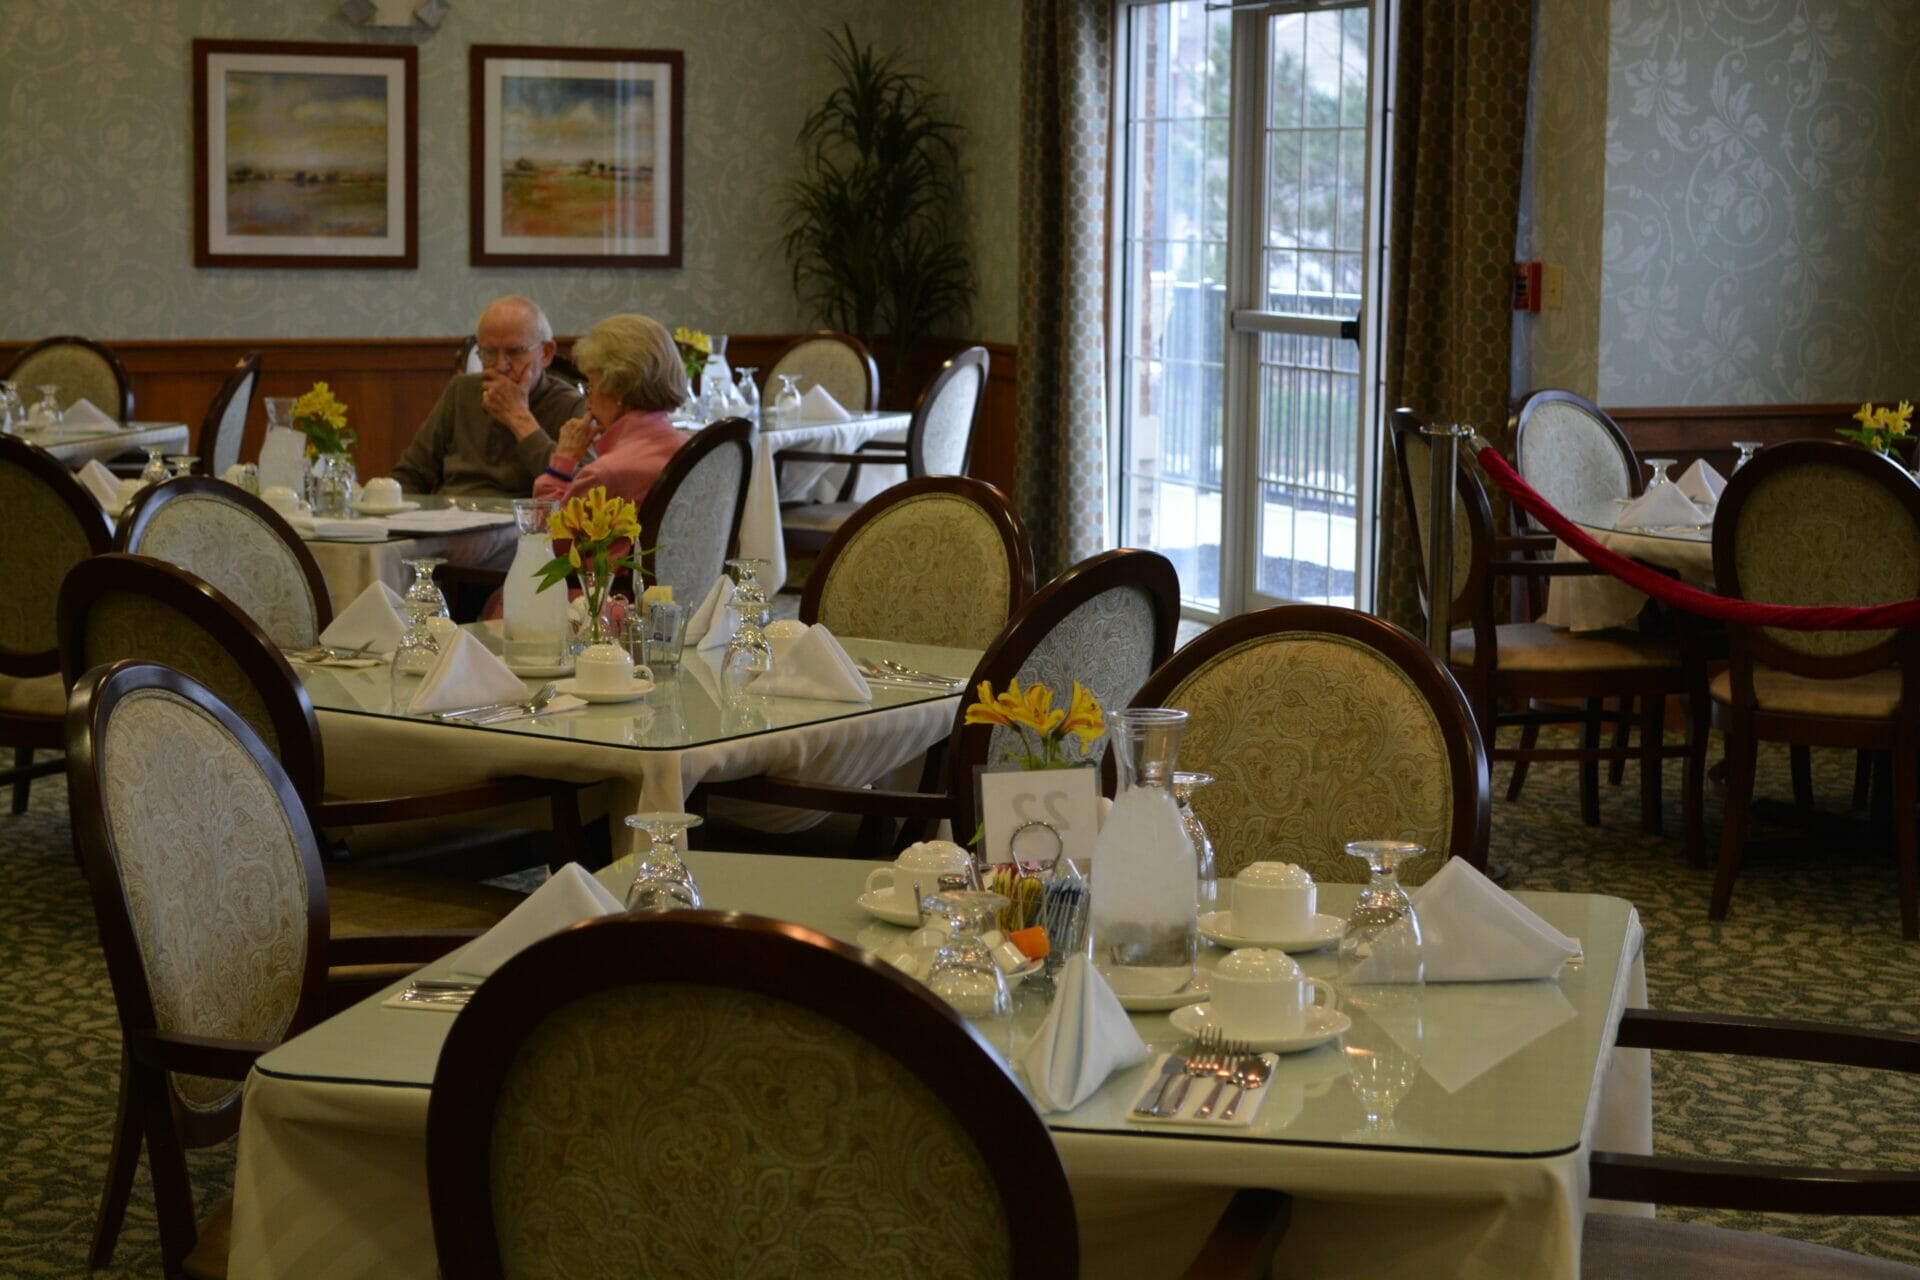 <span  class="uc_style_uc_tiles_grid_image_elementor_uc_items_attribute_title" style="color:#000000;">Allisonville Meadows Assisted Living dining room.</span>